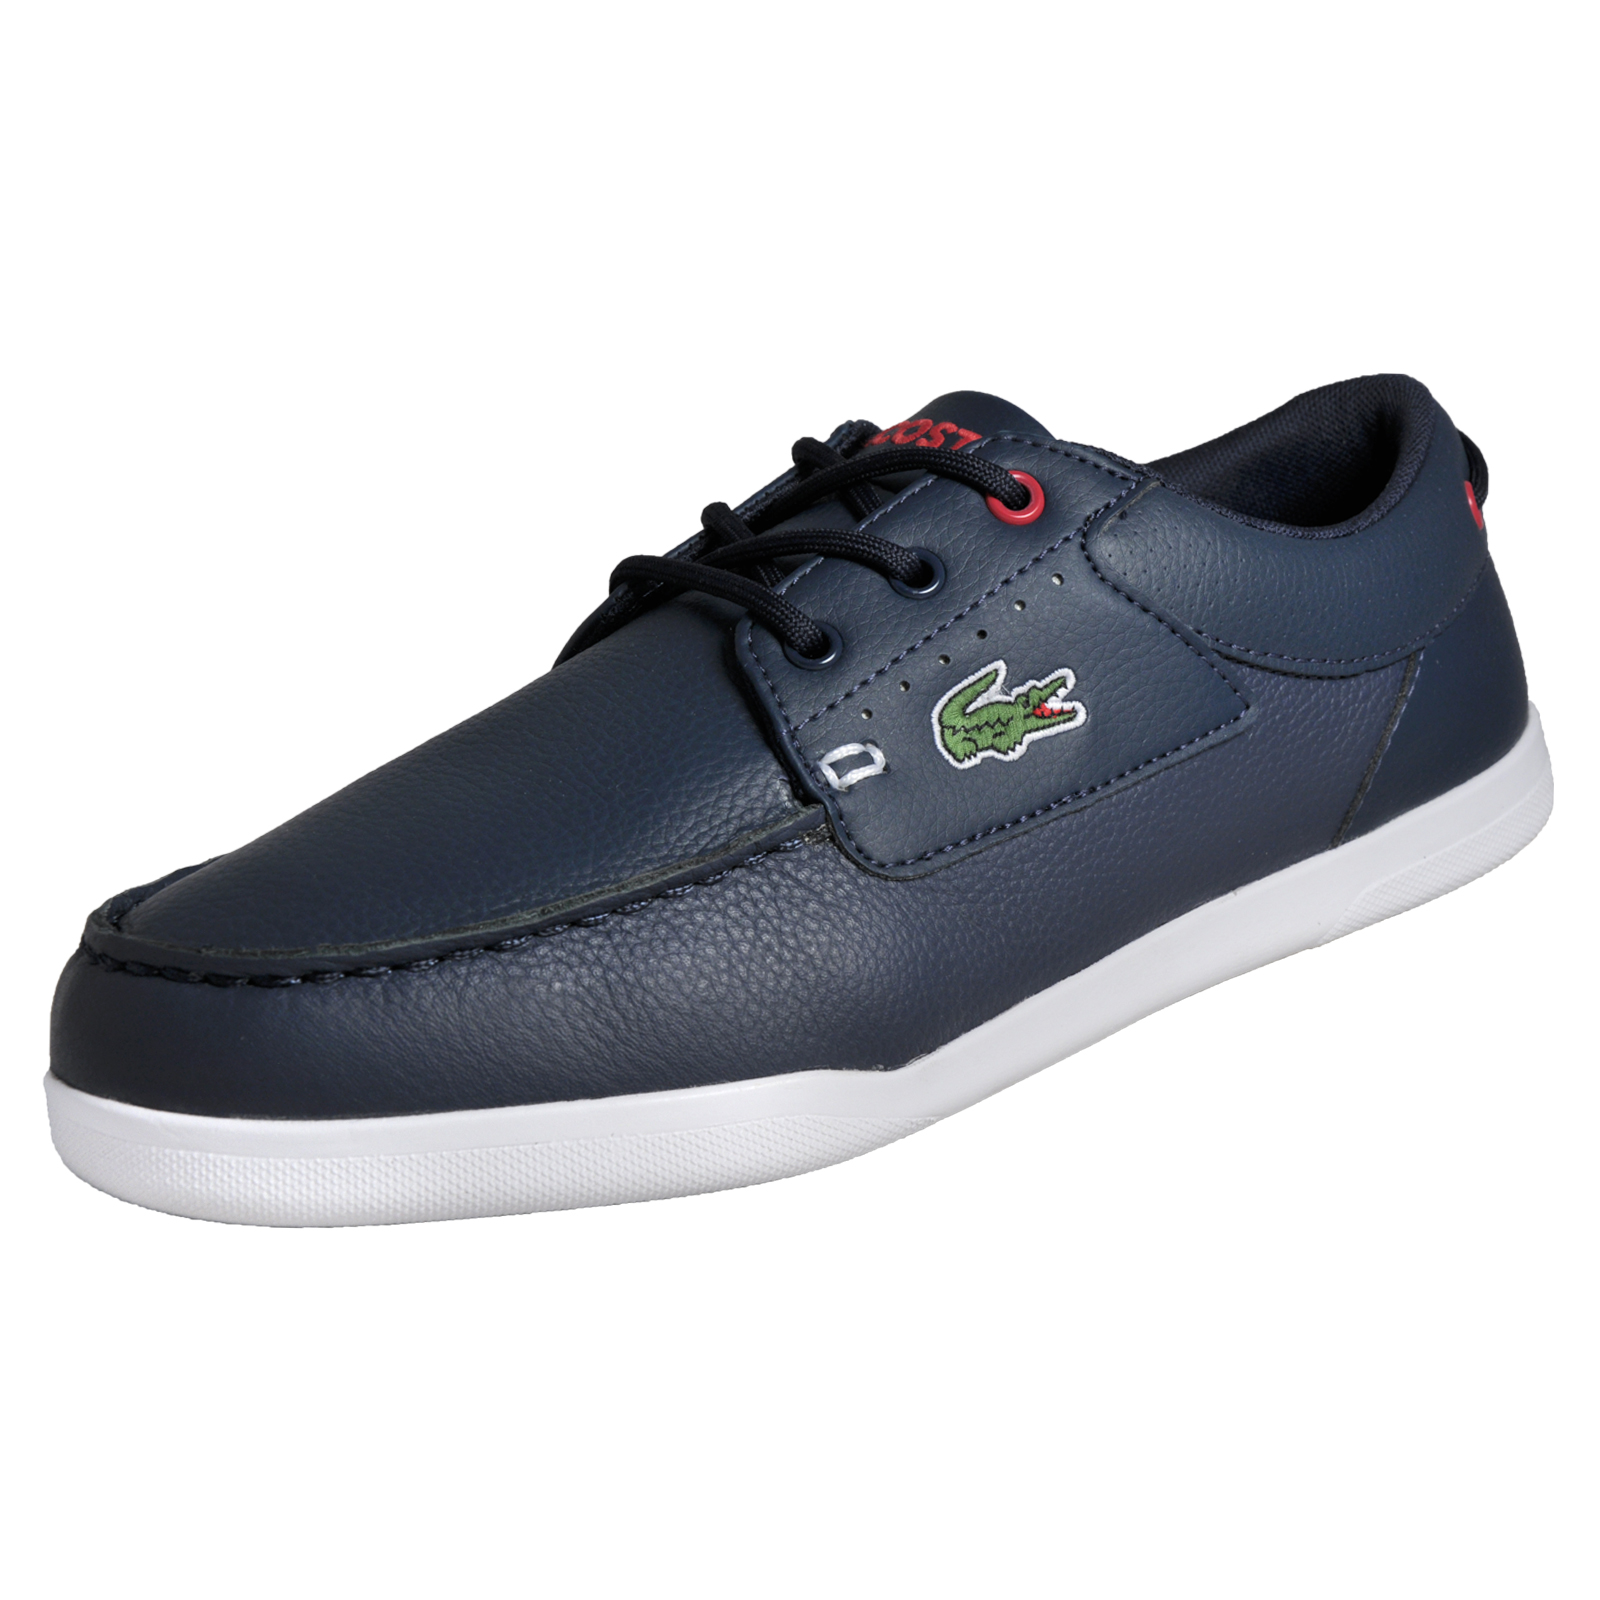 Lacoste Codecasa 316 Mens Classic Designer Deck Shoes Leather Trainers ...